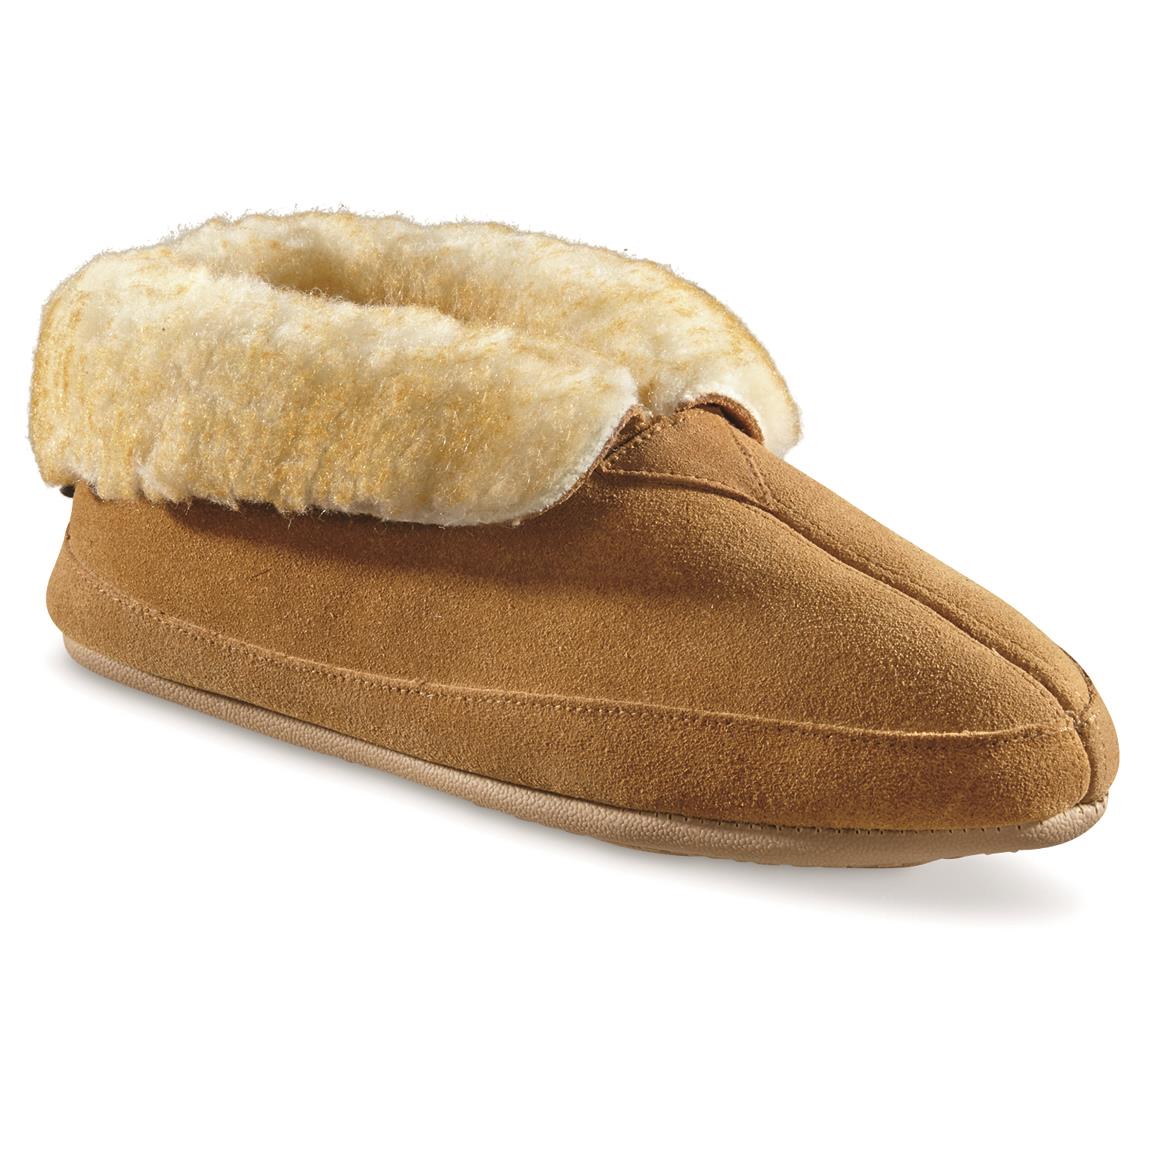 Guide Gear Women's Wool Roll Bootie Slippers - 77186, Slippers at ...